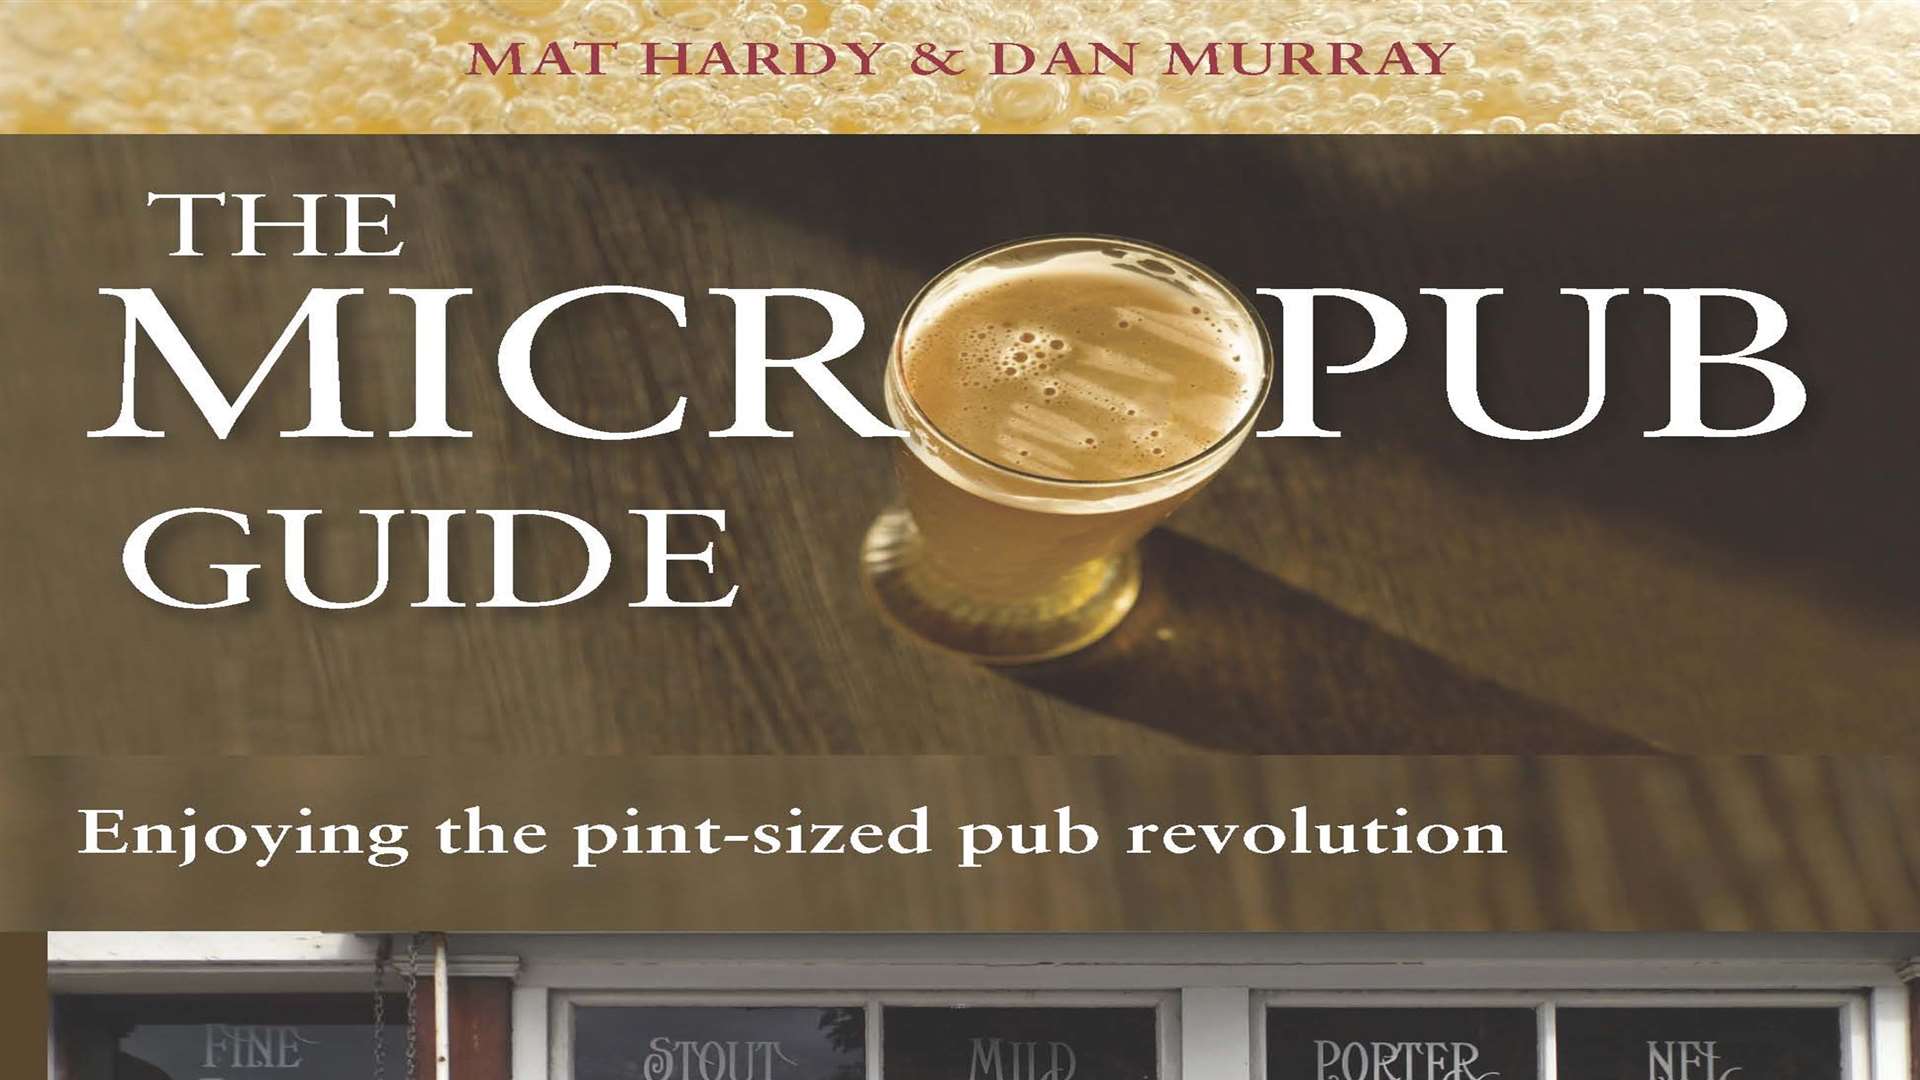 The Micropub Guide by Mat Hardy and Dan Murray